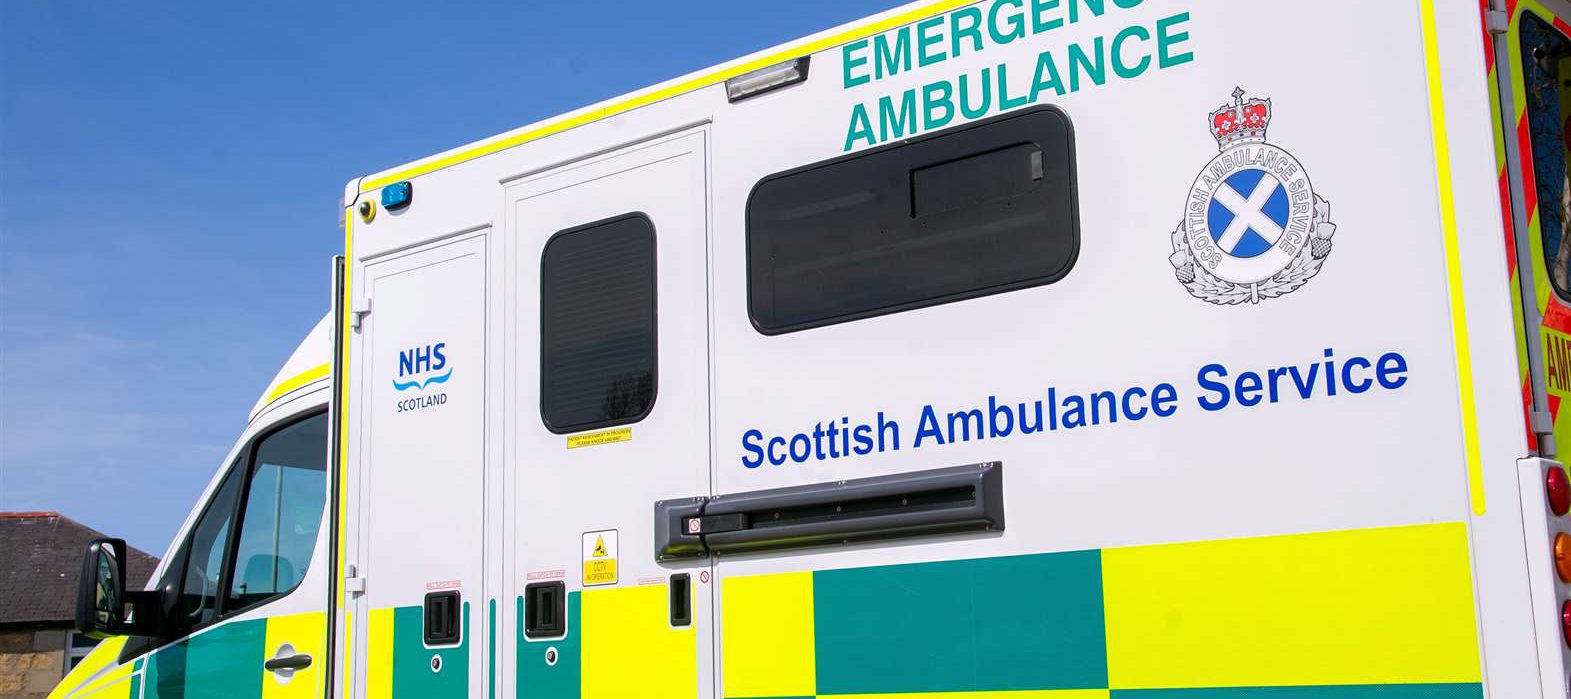 A Scottish Ambulance viewed from the side